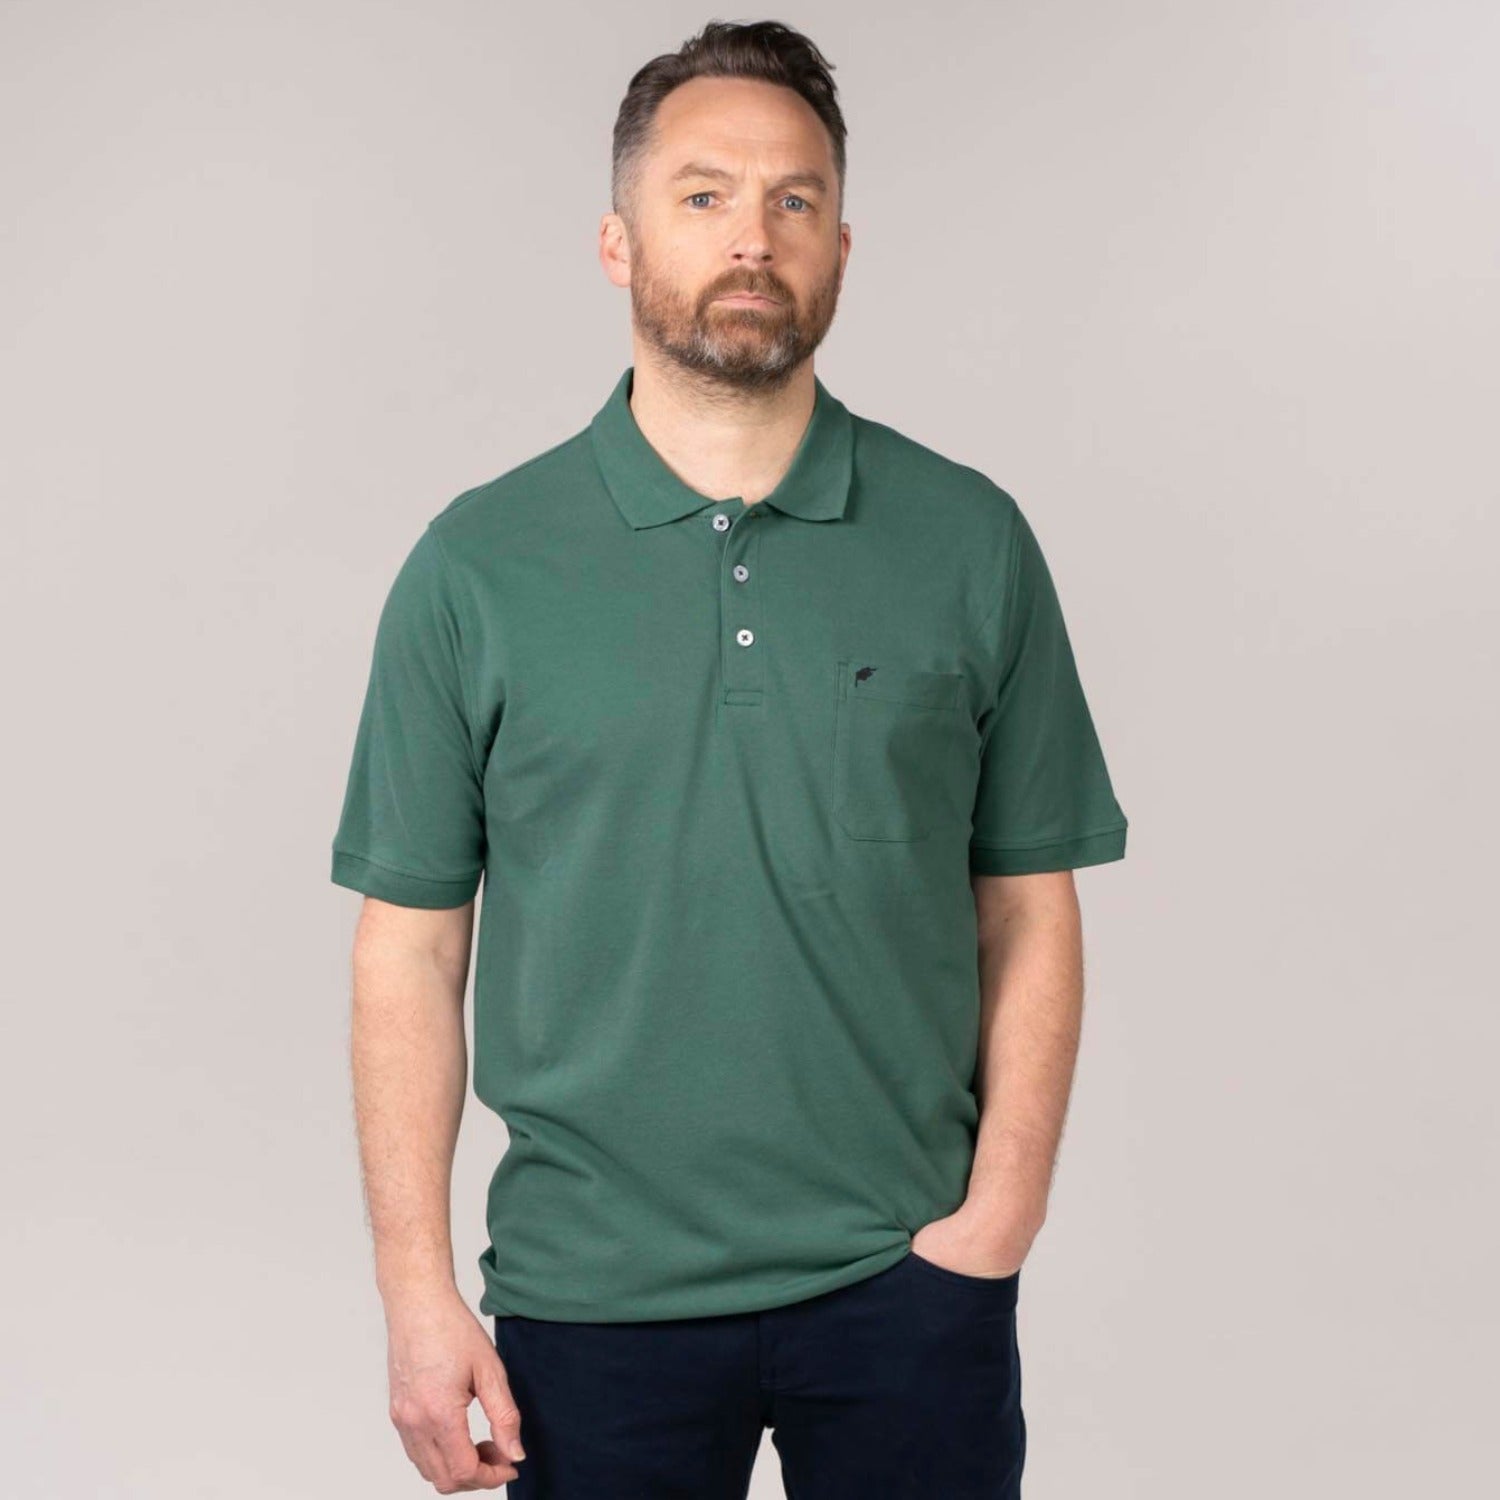 Yeats Niels Short-sleeve Polo Field Green 1 Shaws Department Stores